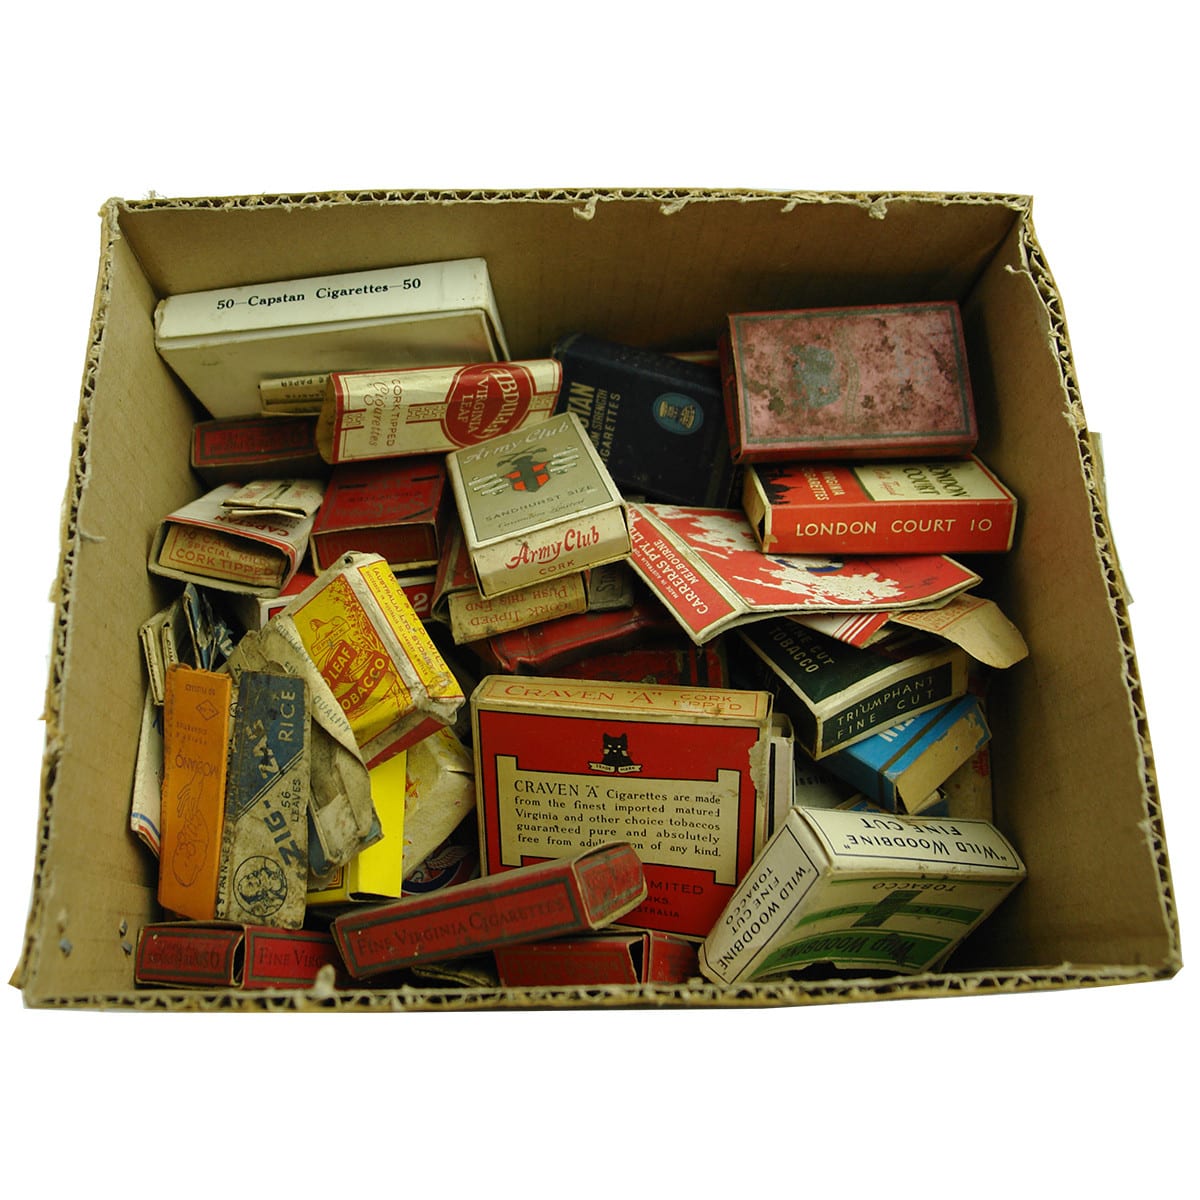 Big box of Cardboard Cigarette Packets and cigarette papers. Nice big range with some early ones.